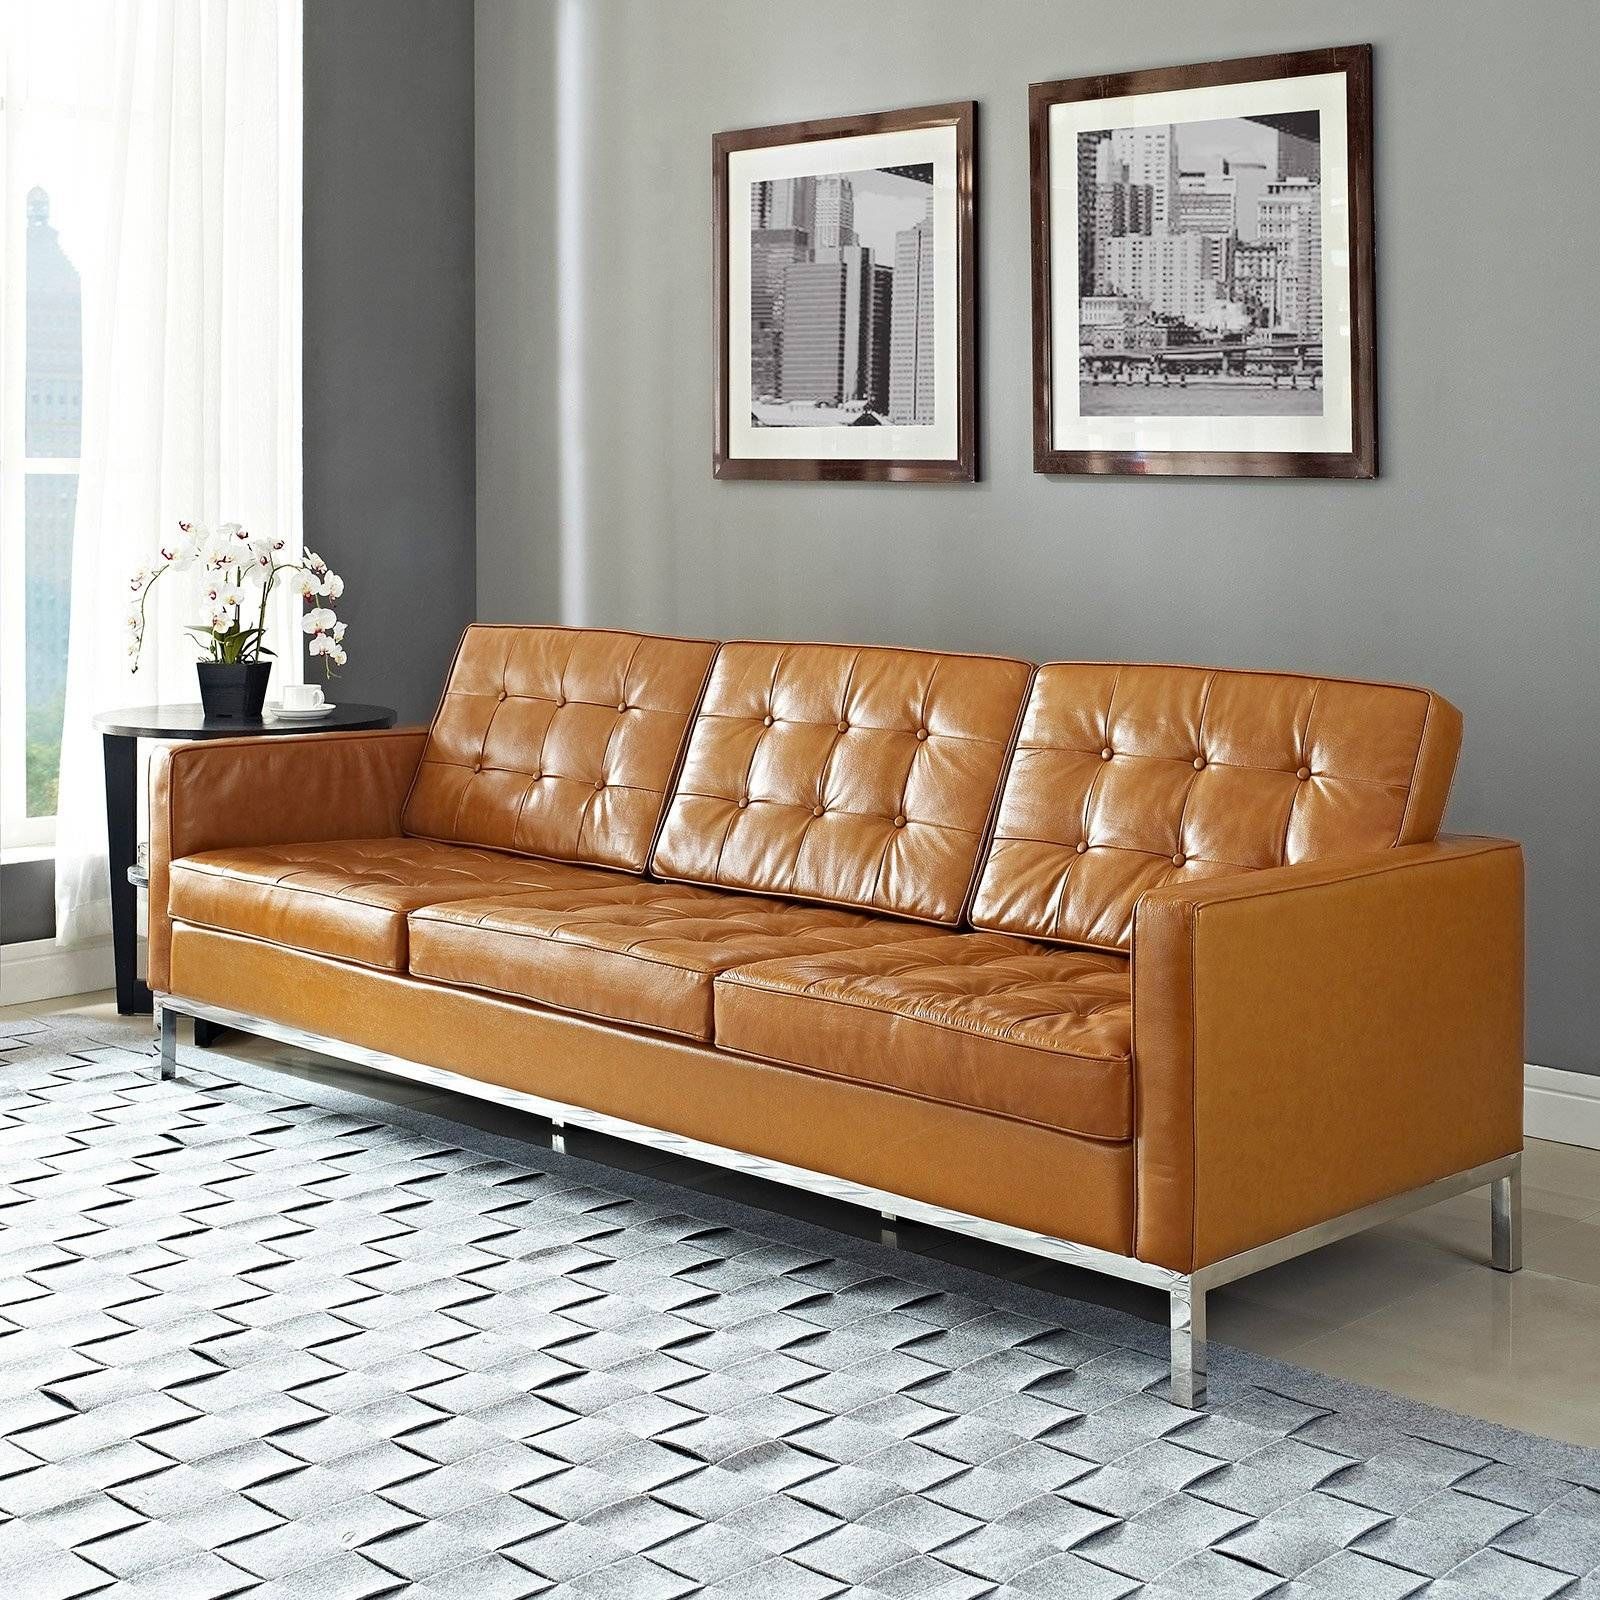 Modway Loft Leather Sofa | Hayneedle Within Florence Leather Sofas (View 2 of 30)